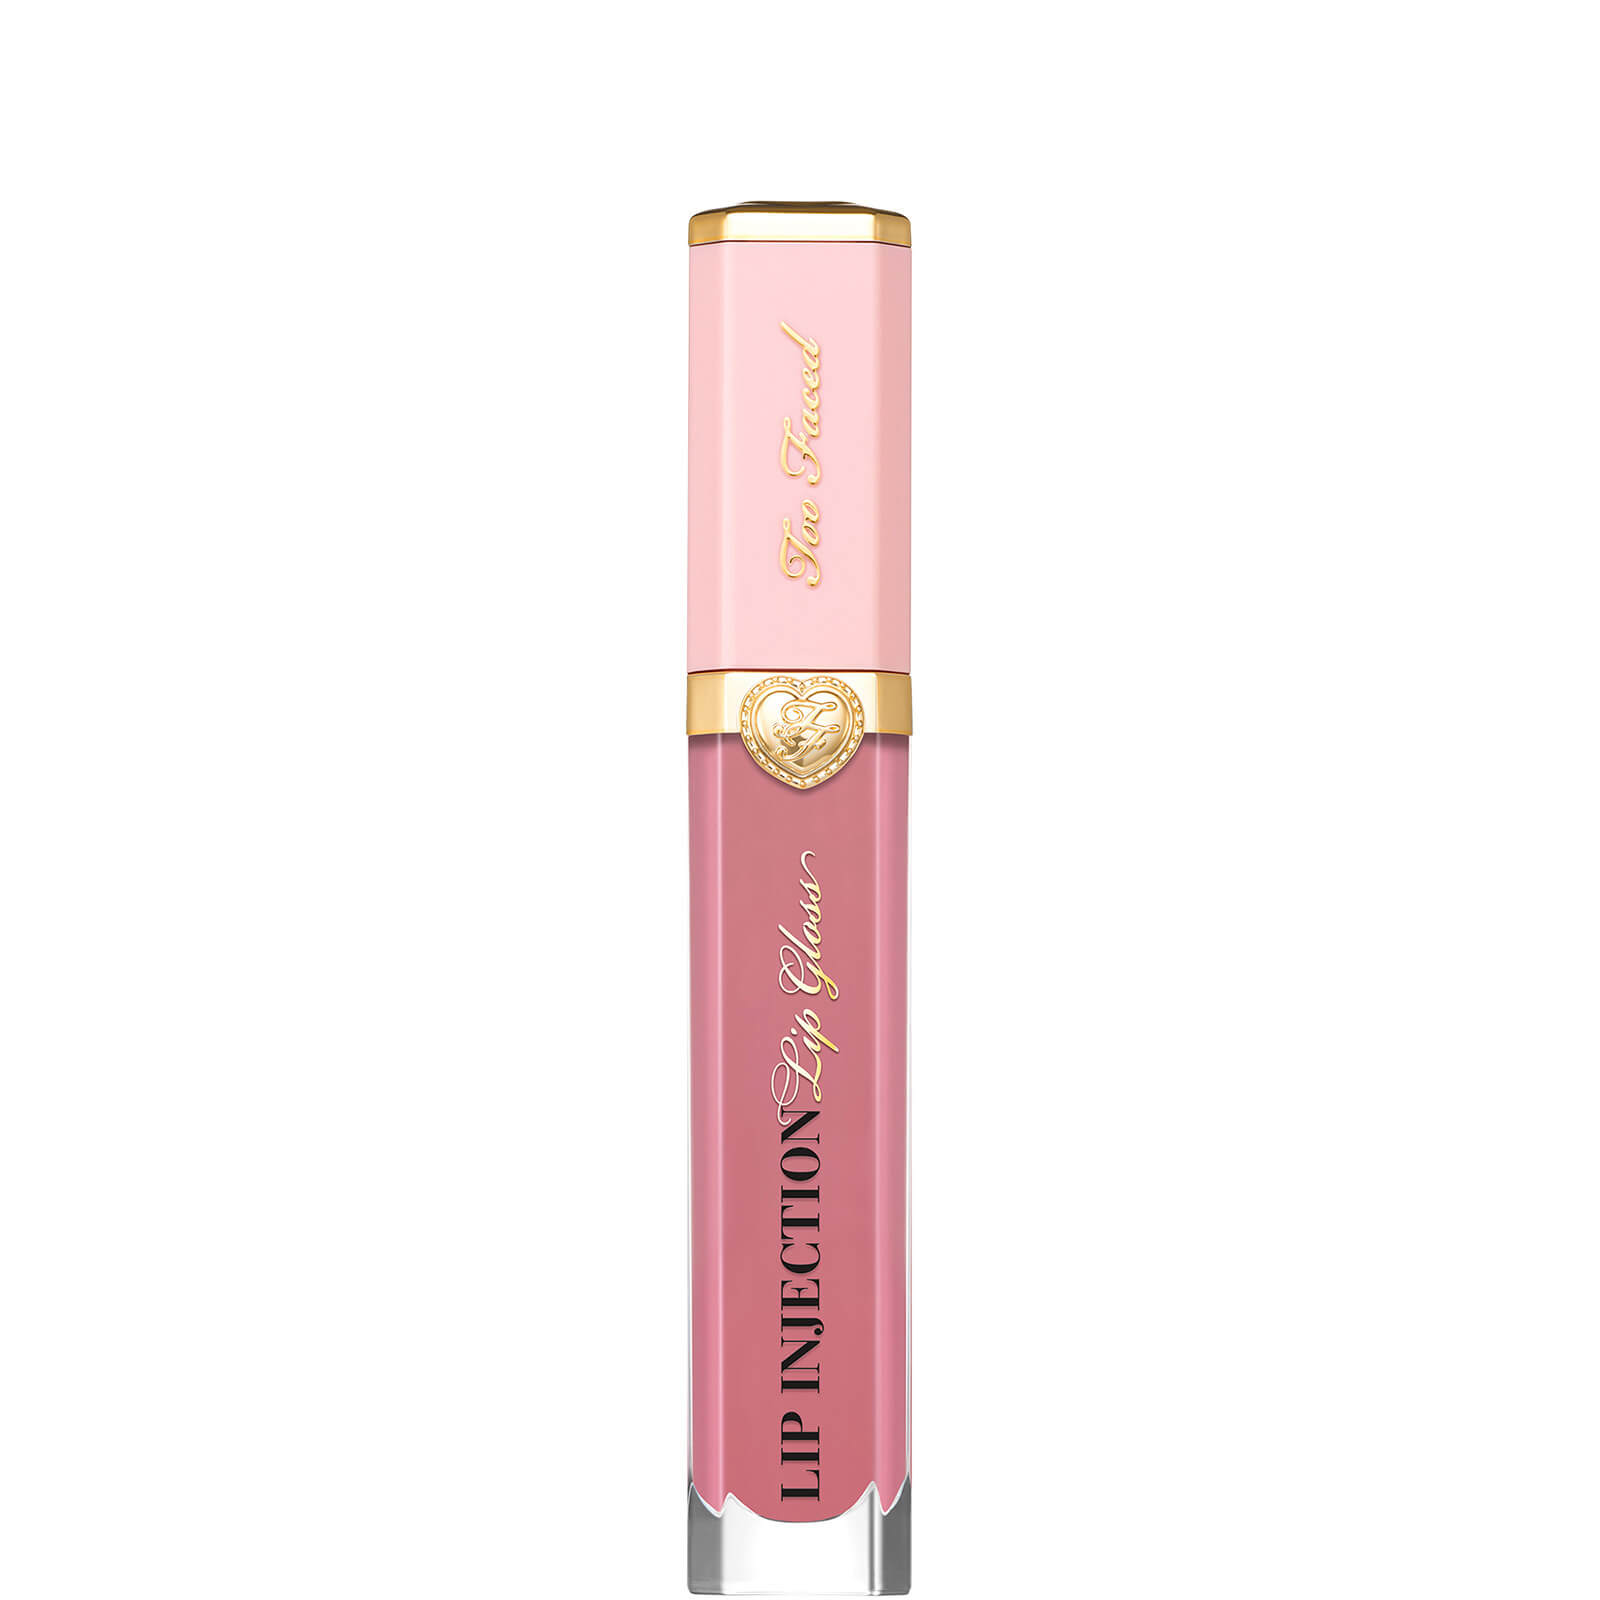 Too Faced Lip Injection Power Plumping Lip Gloss (Various Shades) - Glossy & Bossy